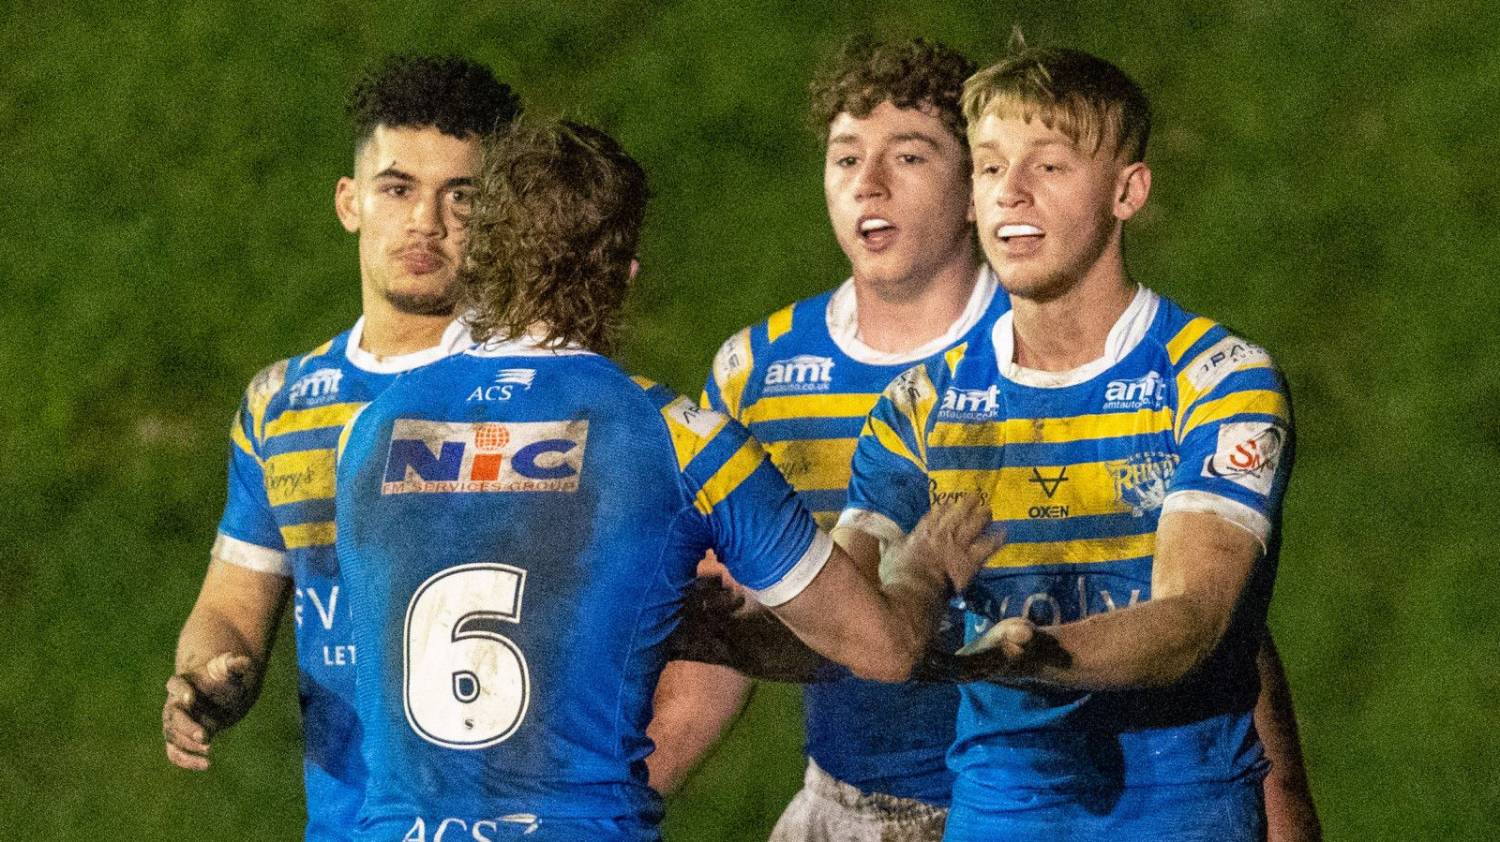 Rhinos Under-18s to take on Tigers at AMT Headingley this Saturday